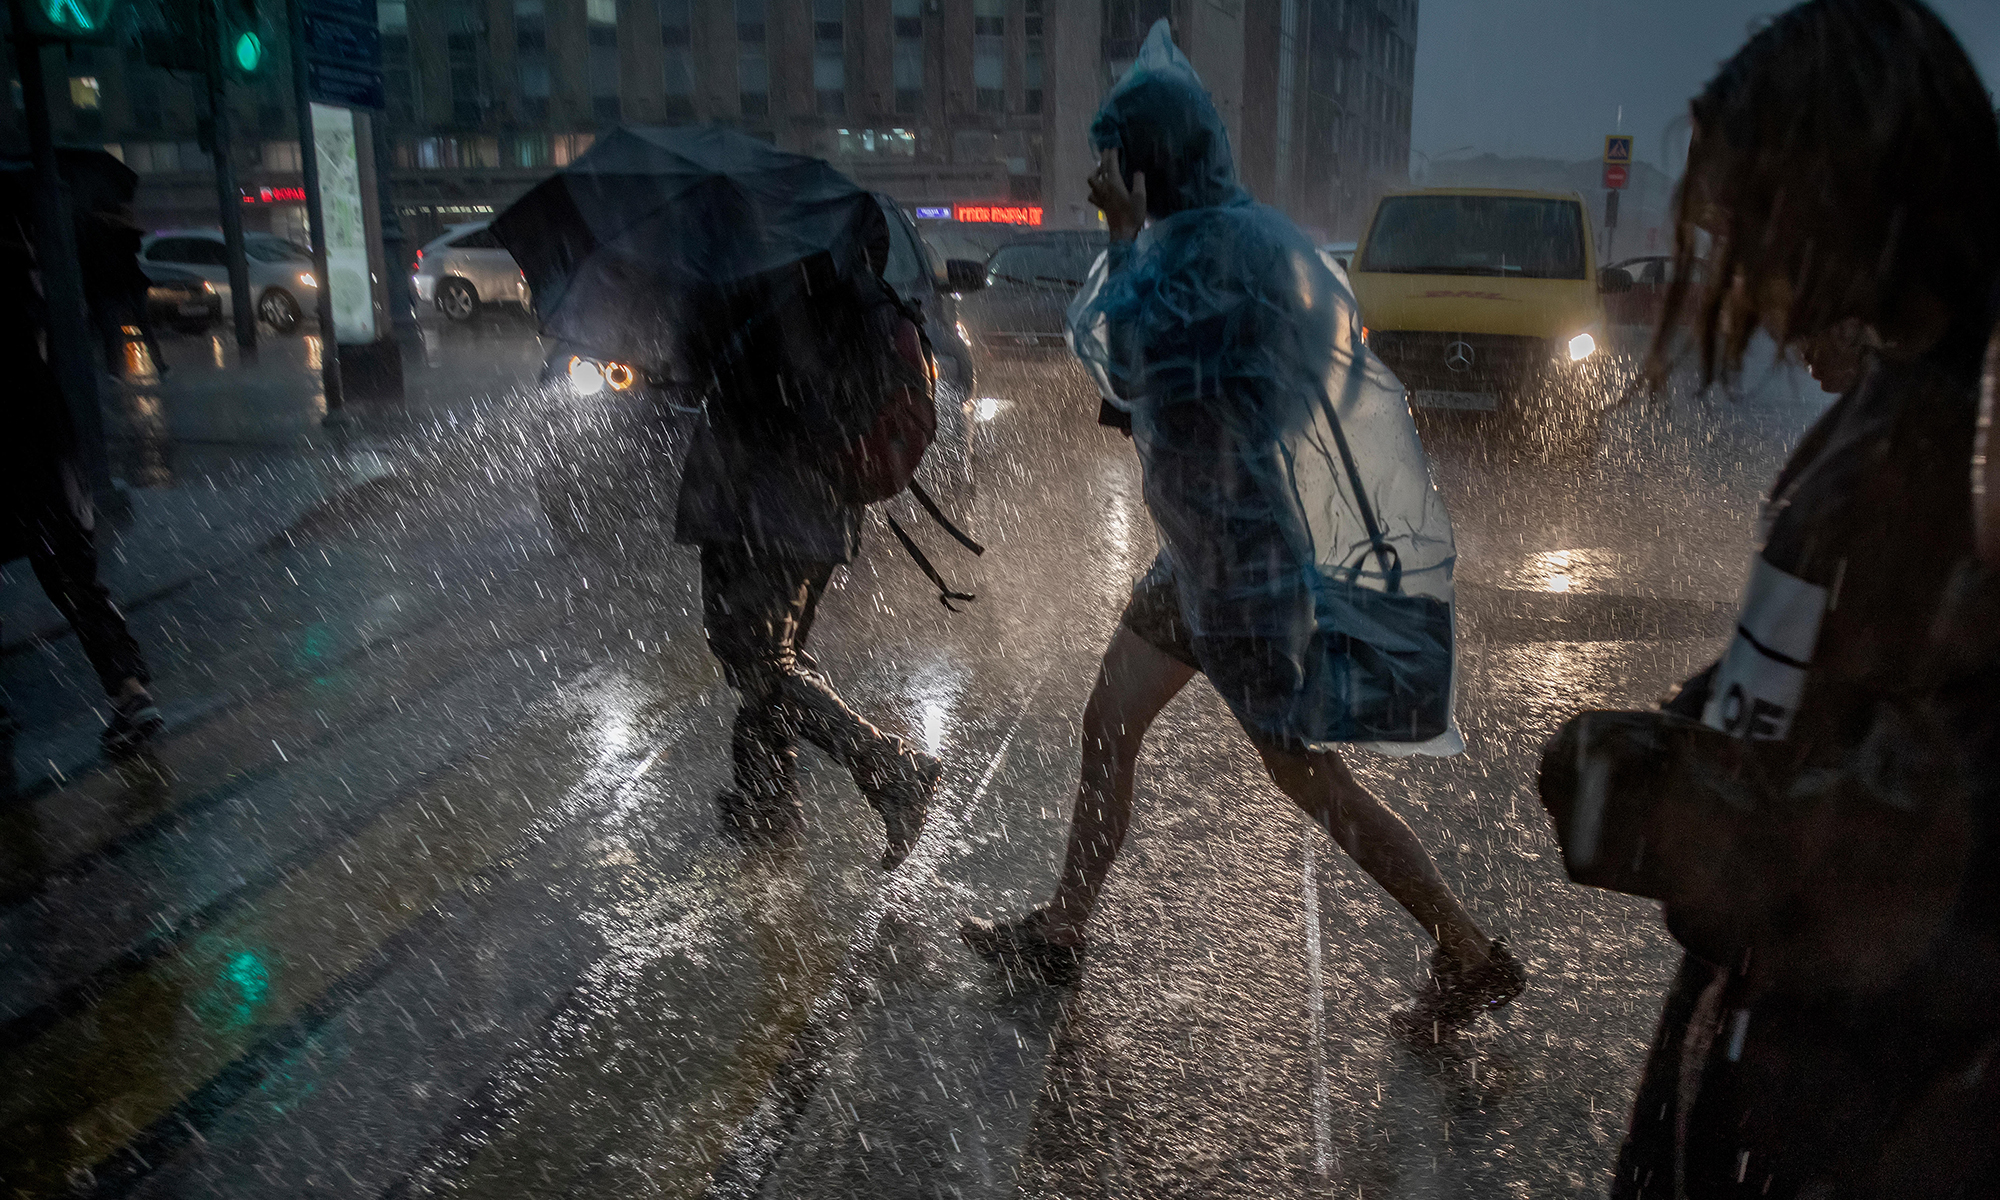 Why has it been raining so hard? How climate change is causing heavier downpours